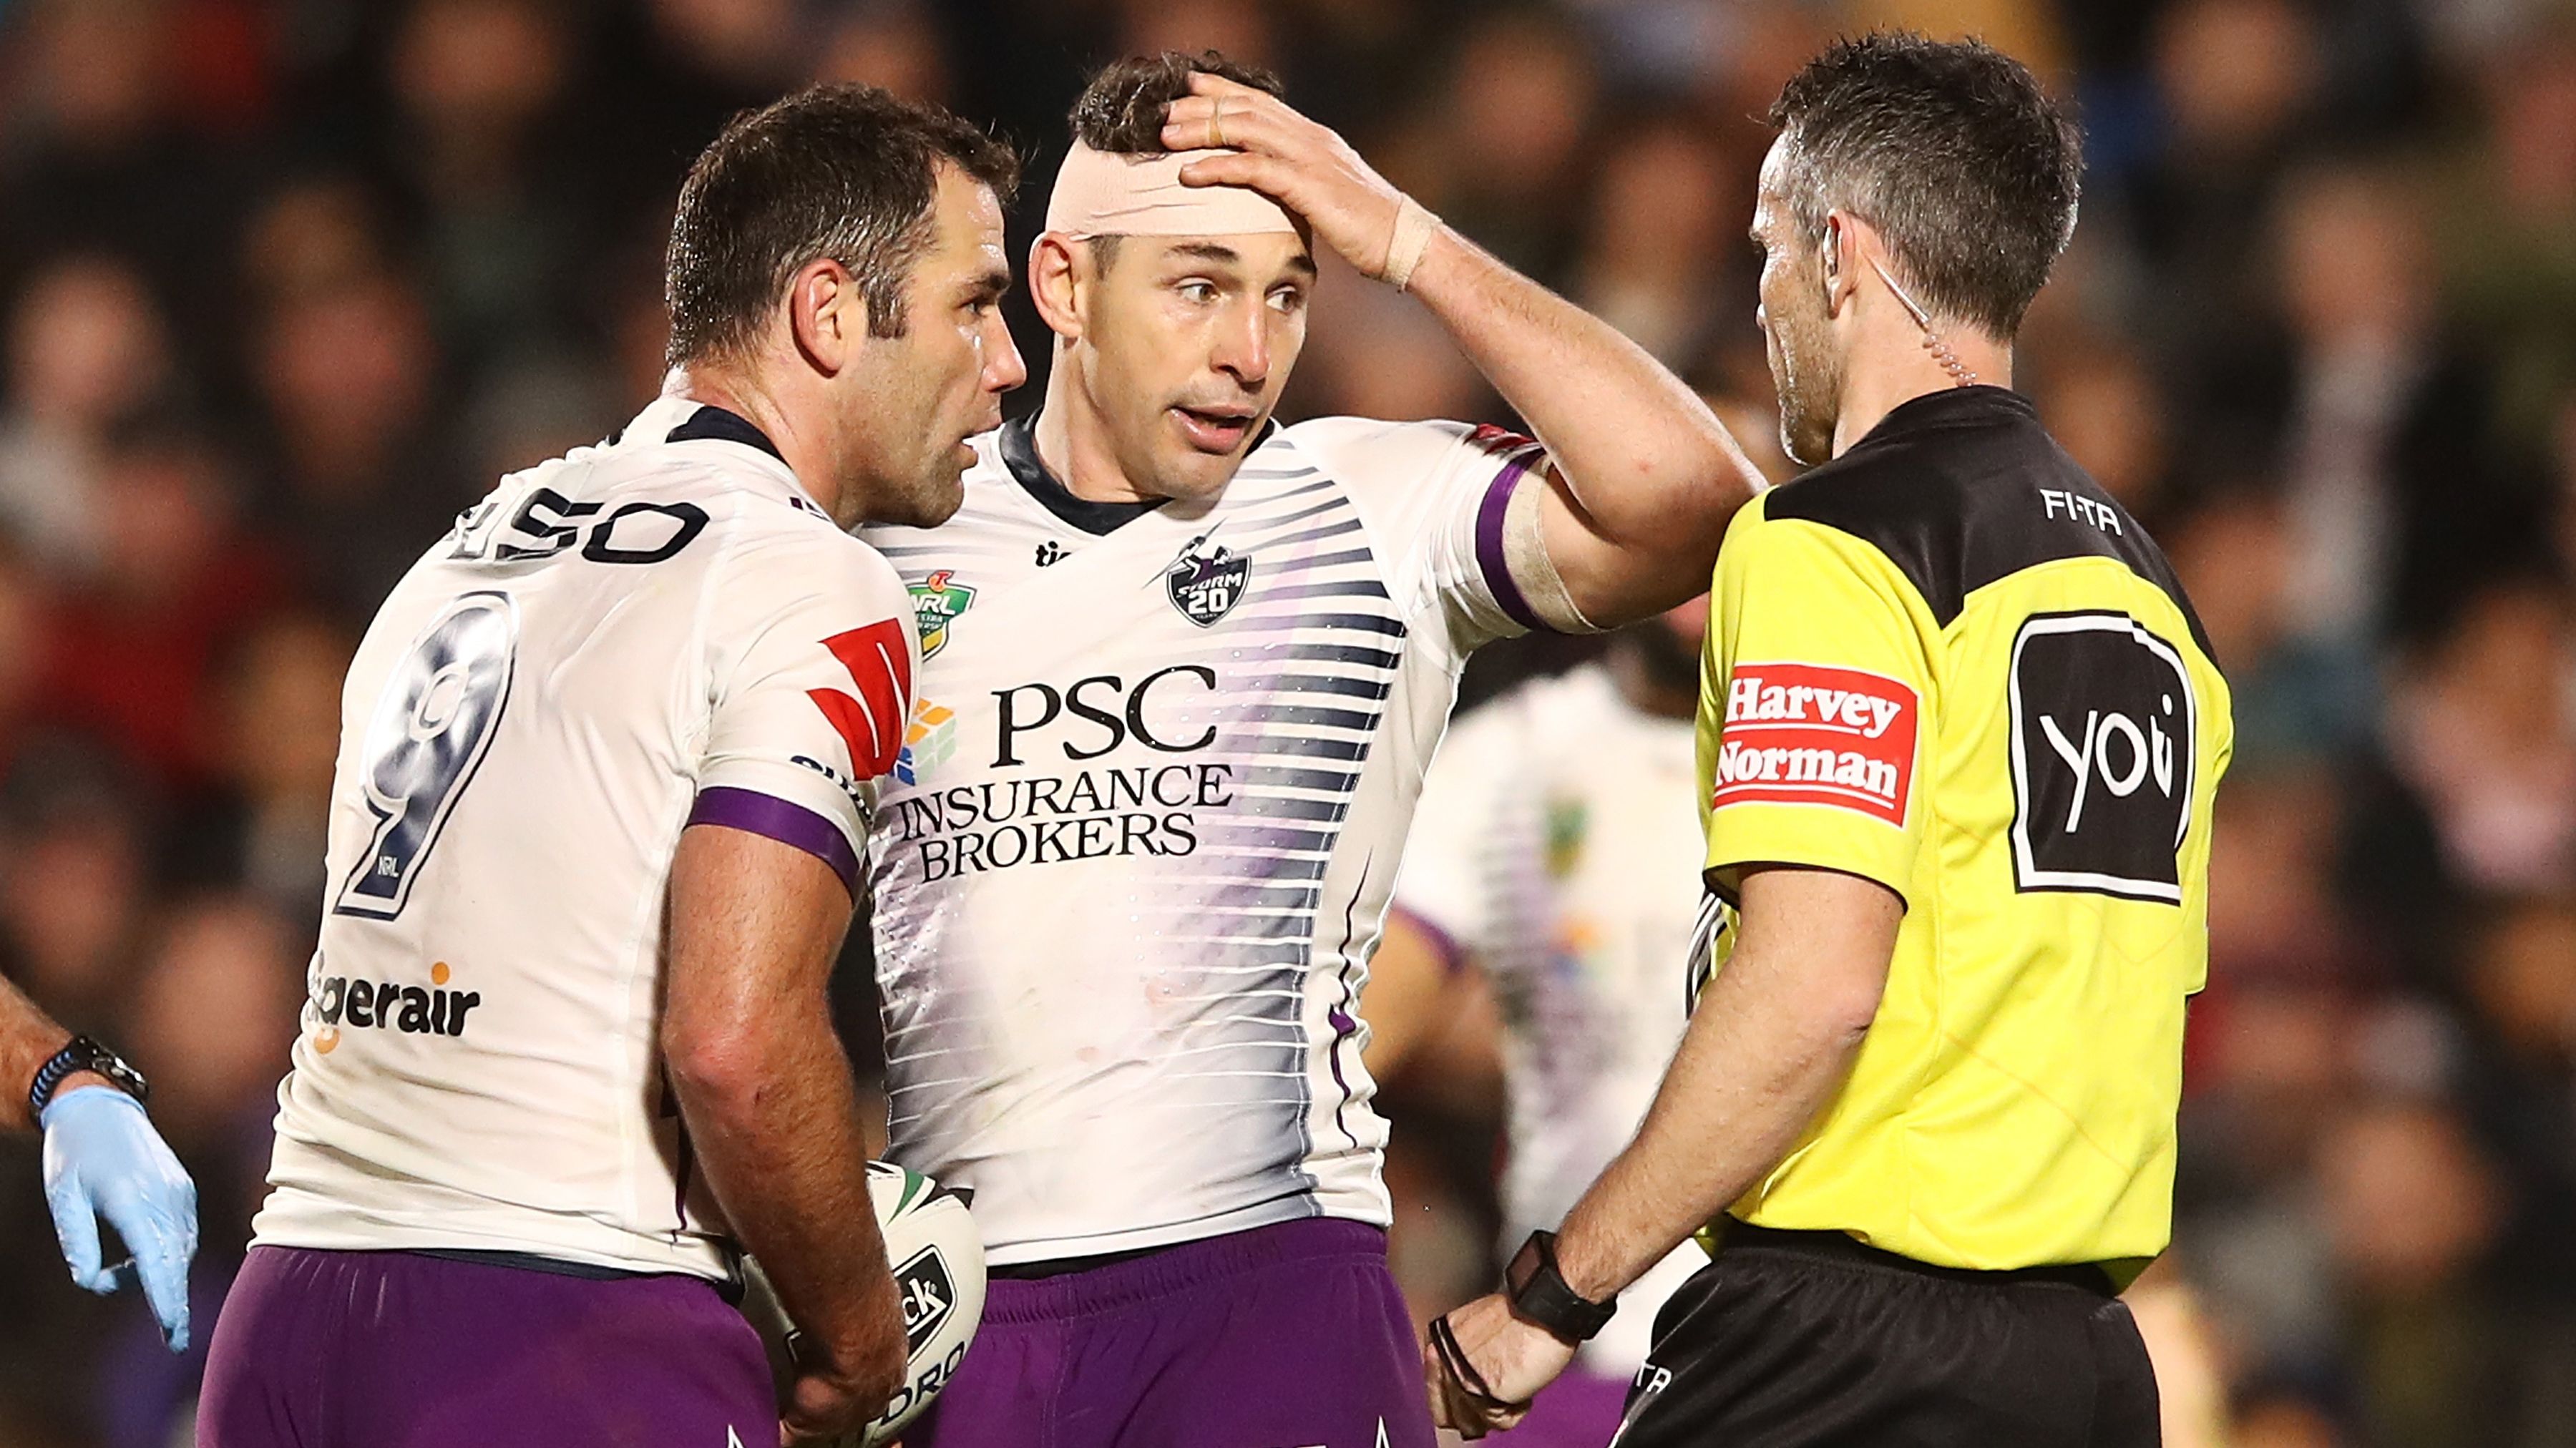 EXCLUSIVE: Billy Slater explain's Cameron Smith's unknown nickname